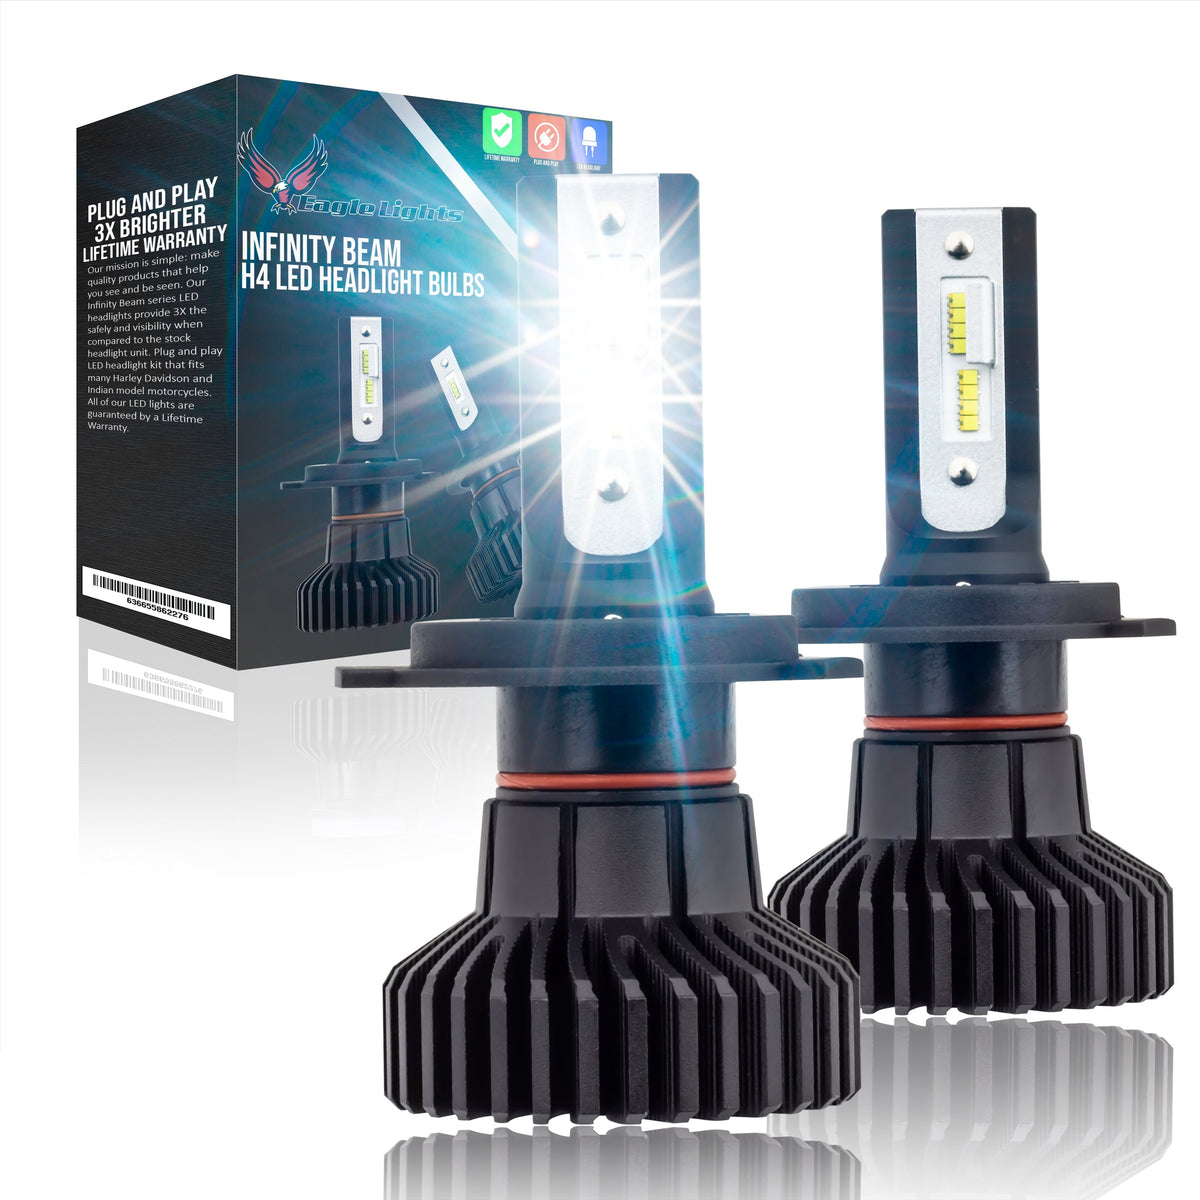 Eagle Lights Infinity Beam H4 LED Headlight Bulb  - 2 Pack (High and Low Beam)